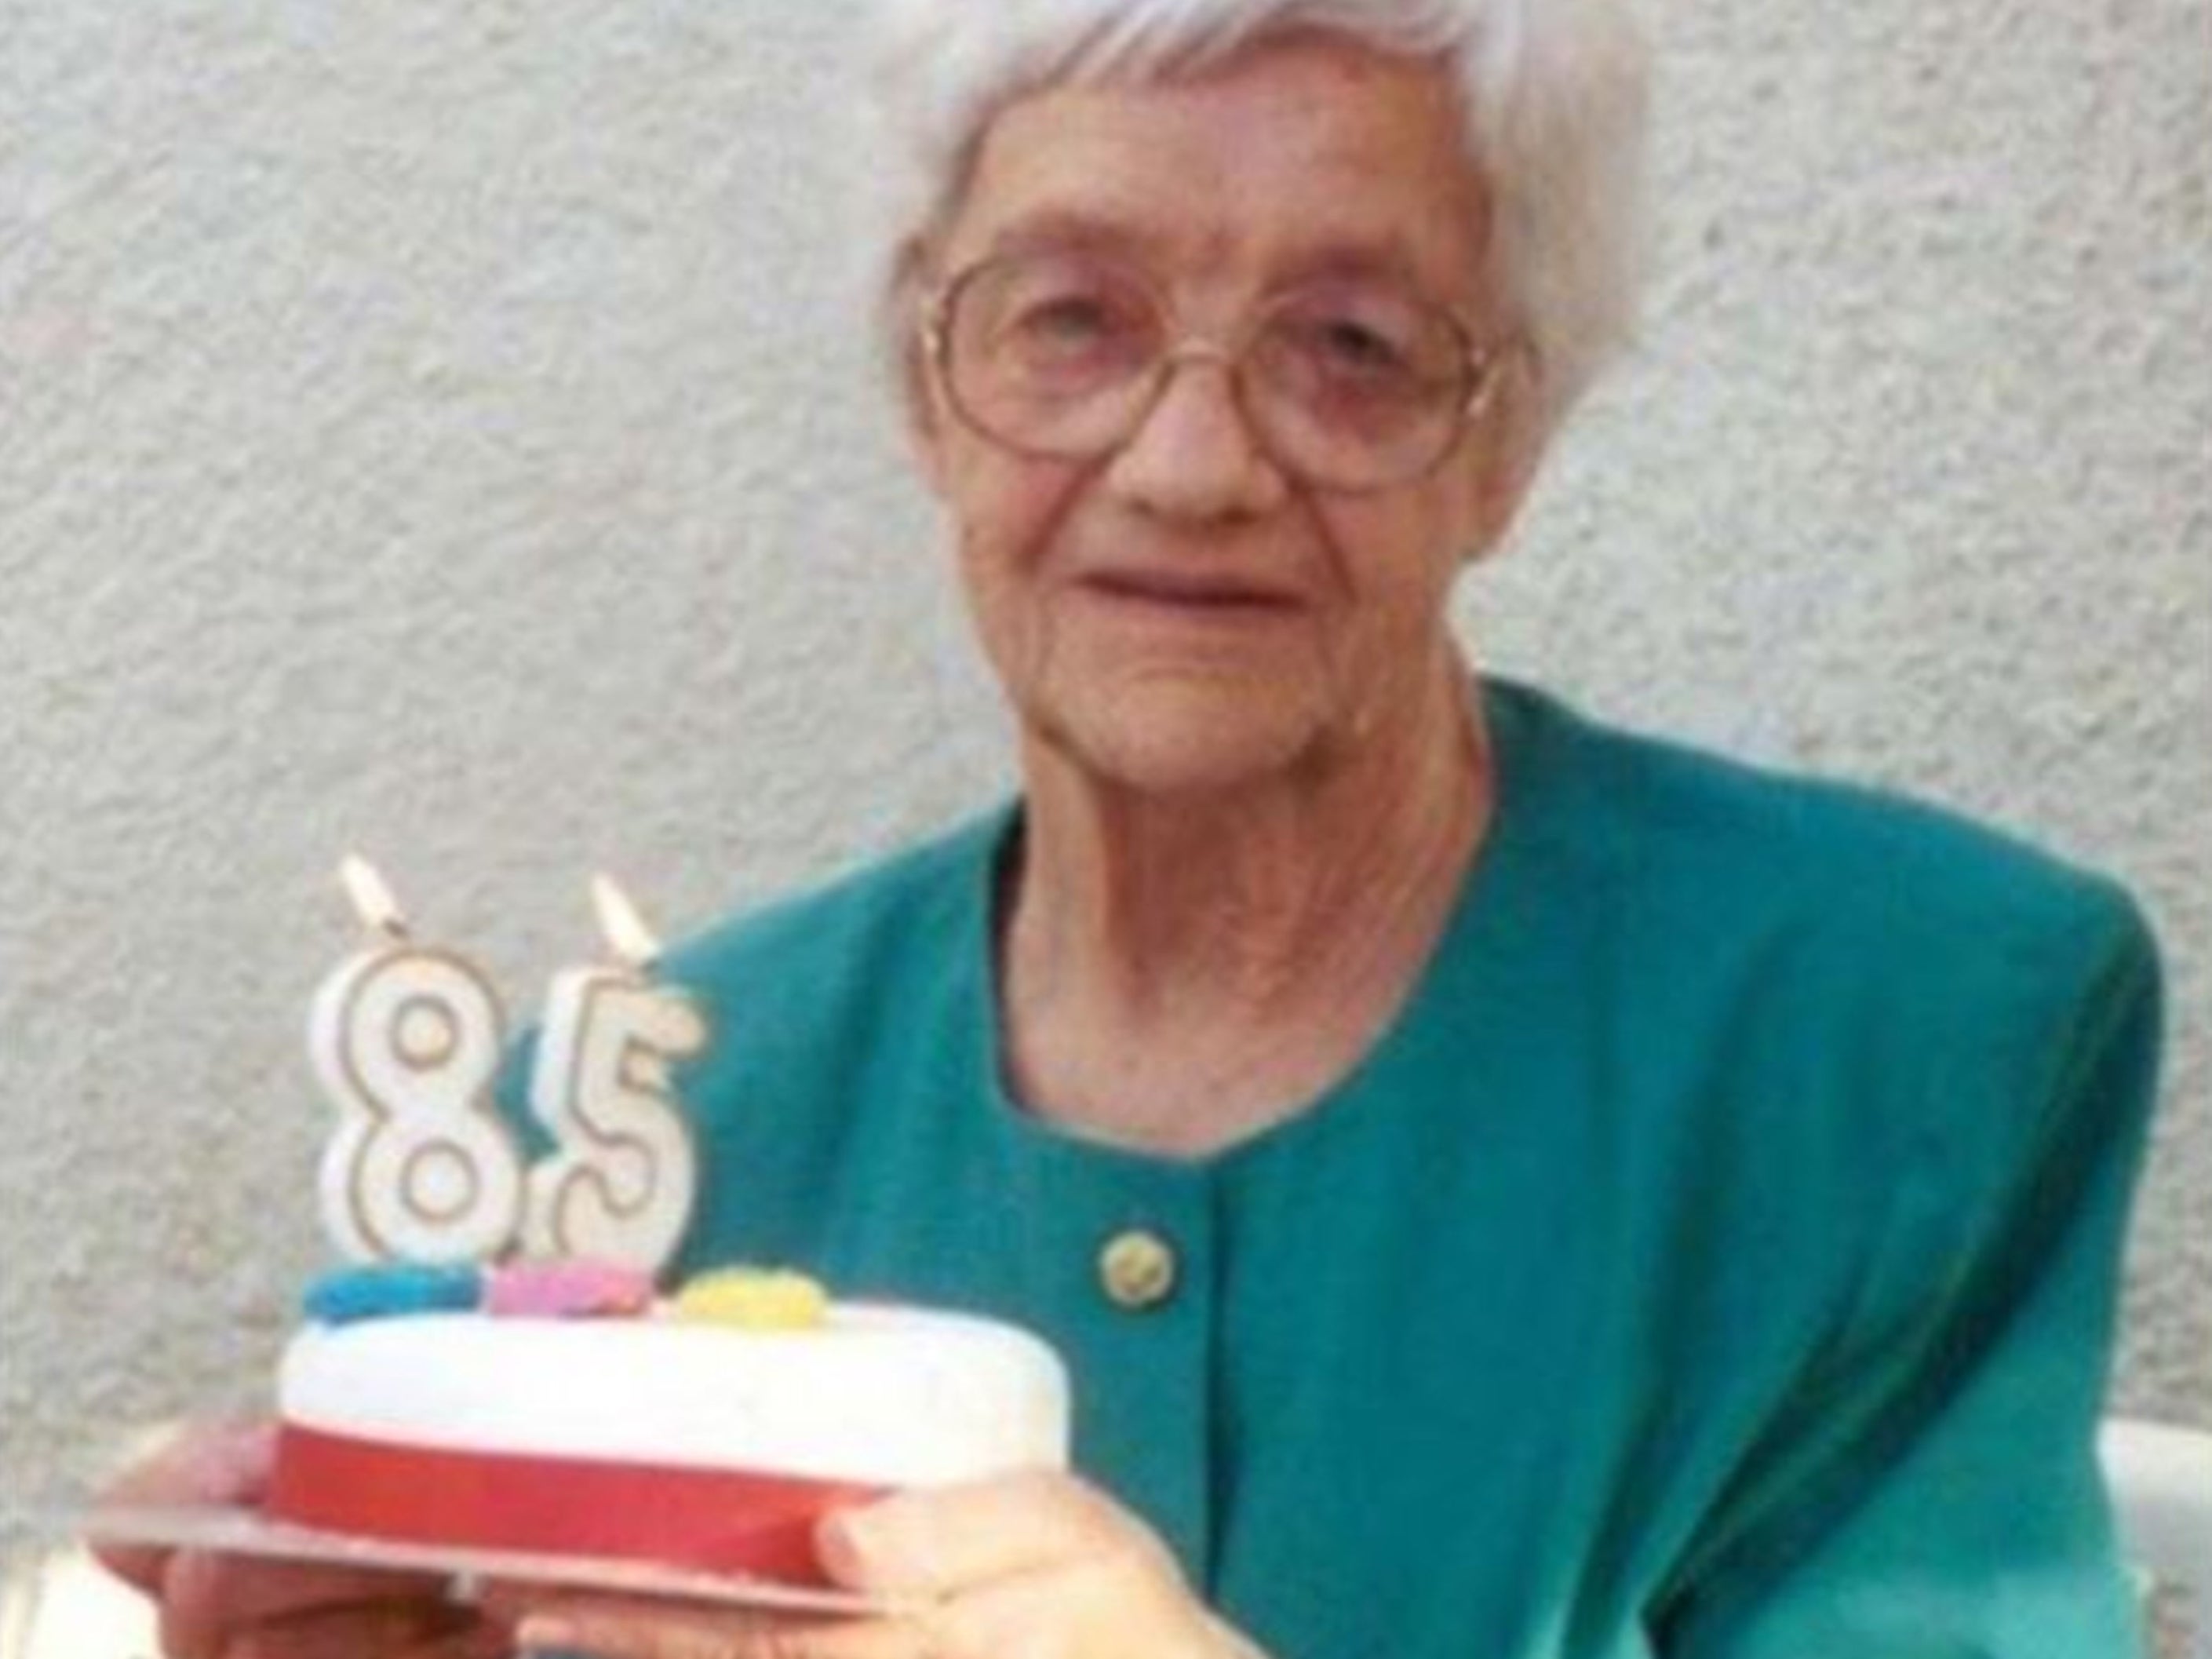 The pensioner was left “shocked and very distressed” and “black and blue” before she died